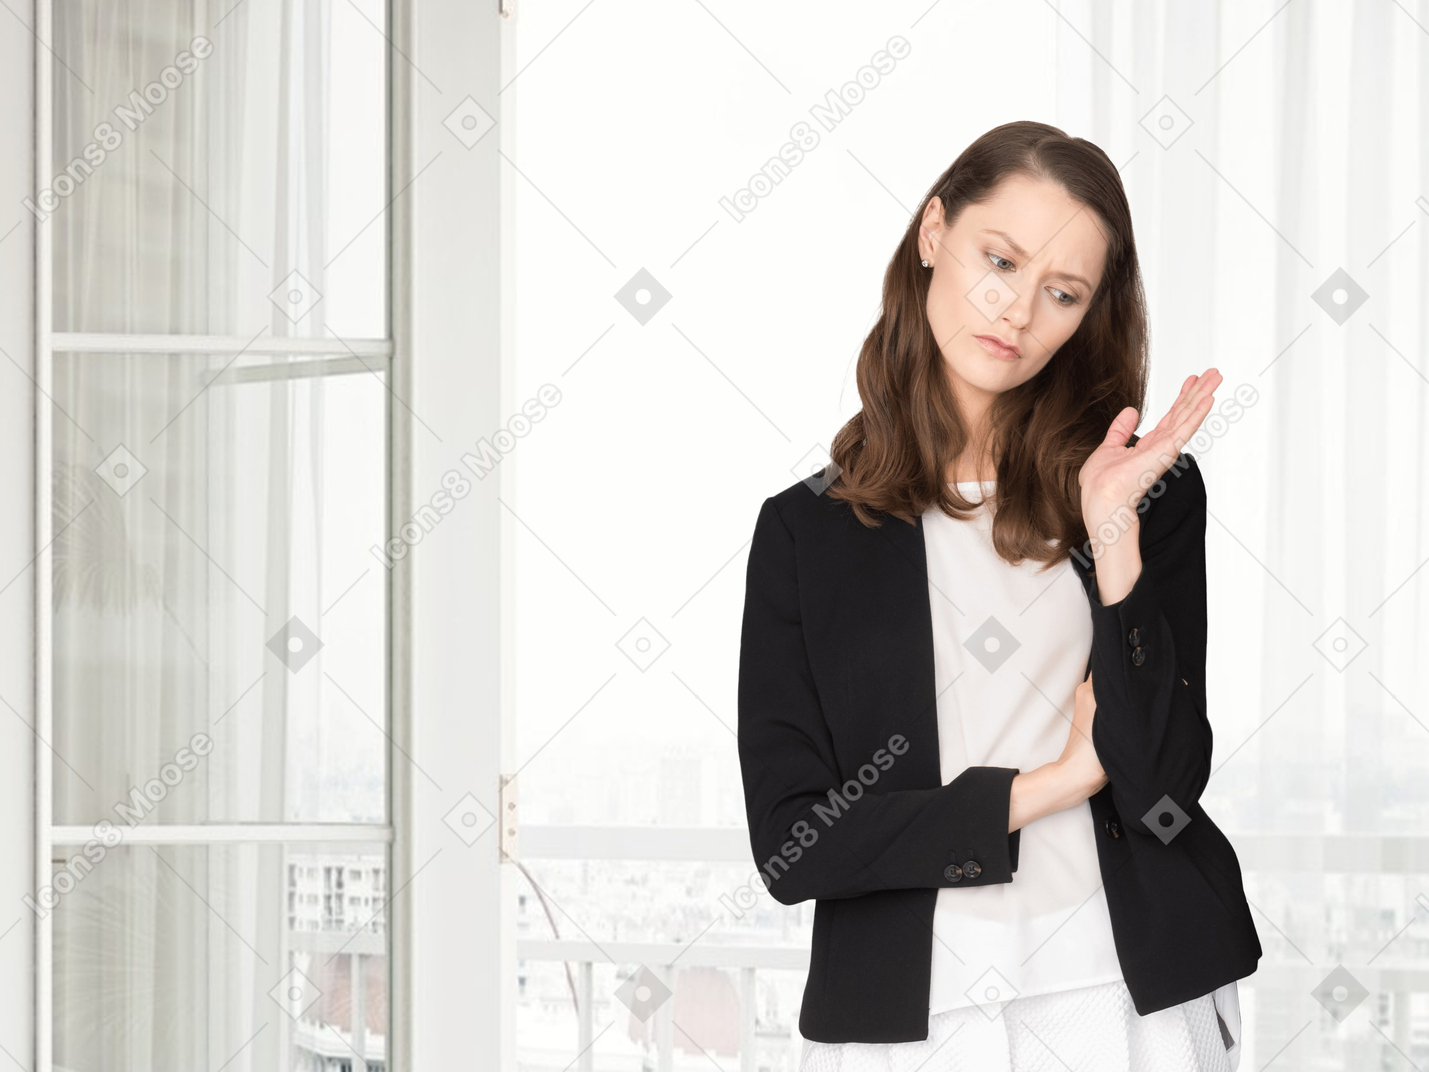 Confused woman standing in front of a window